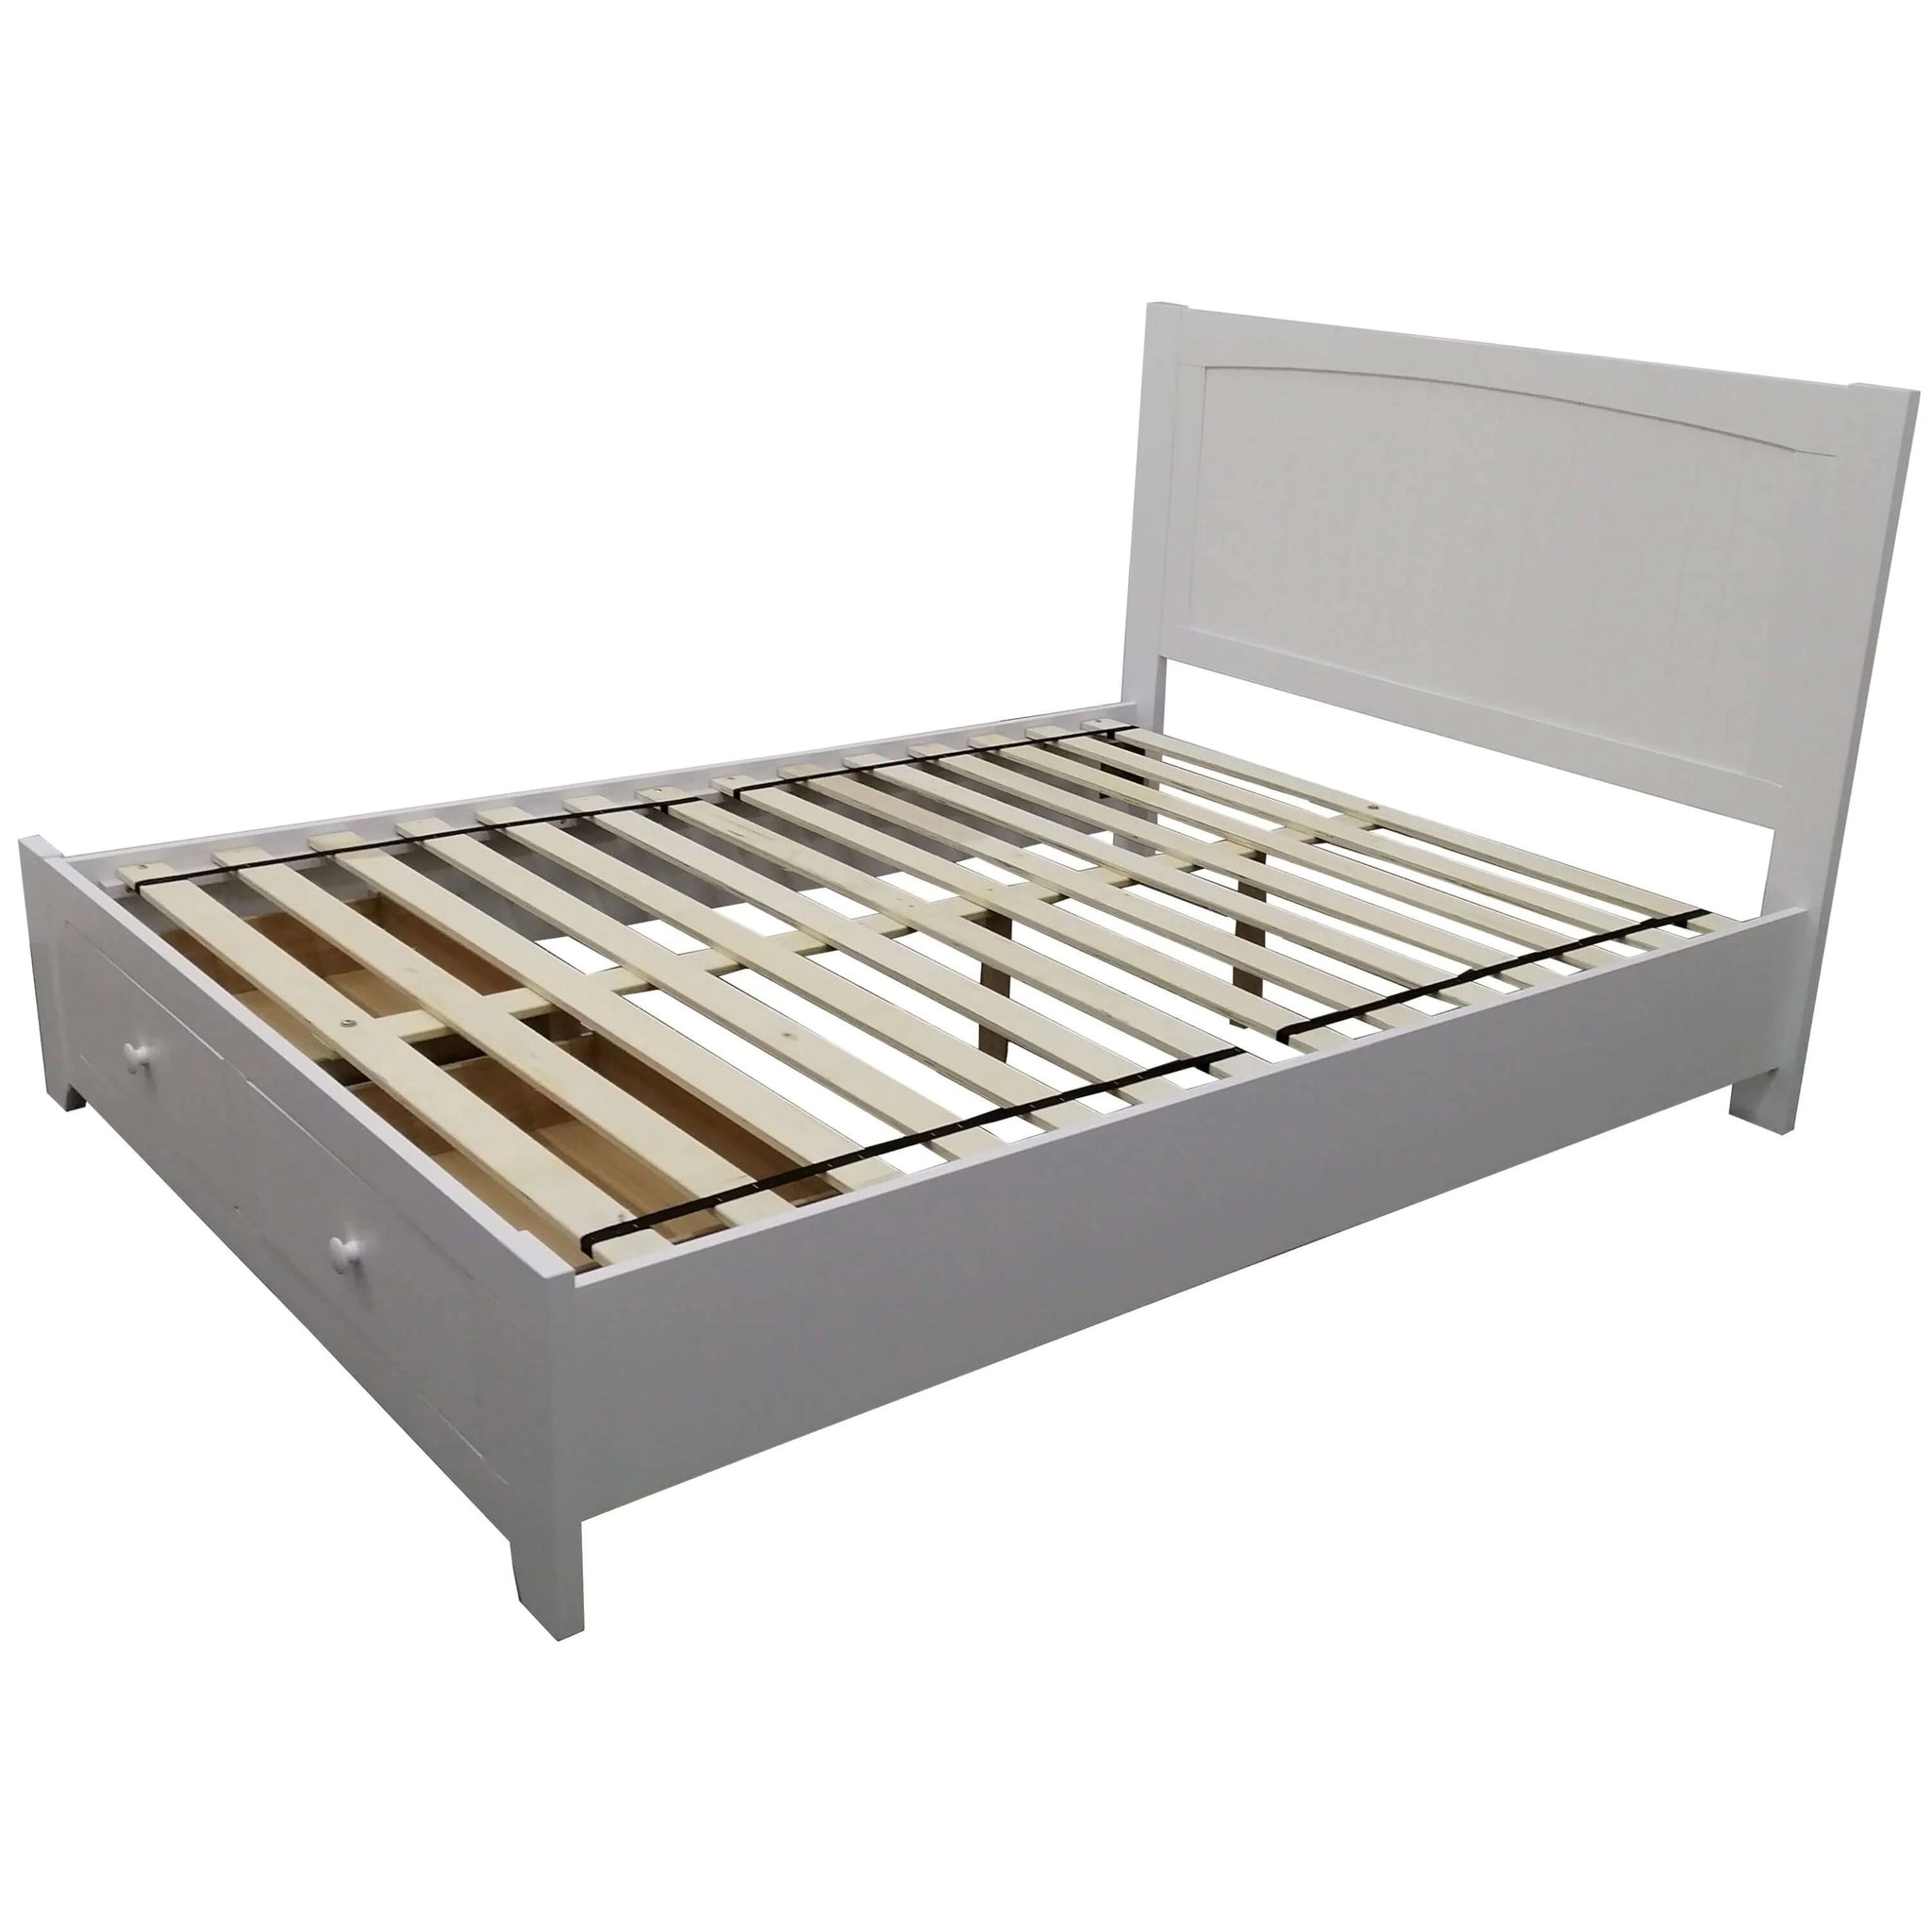 Buy wisteria bed frame queen size mattress base storage drawer timber wood - white - upinteriors-Upinteriors